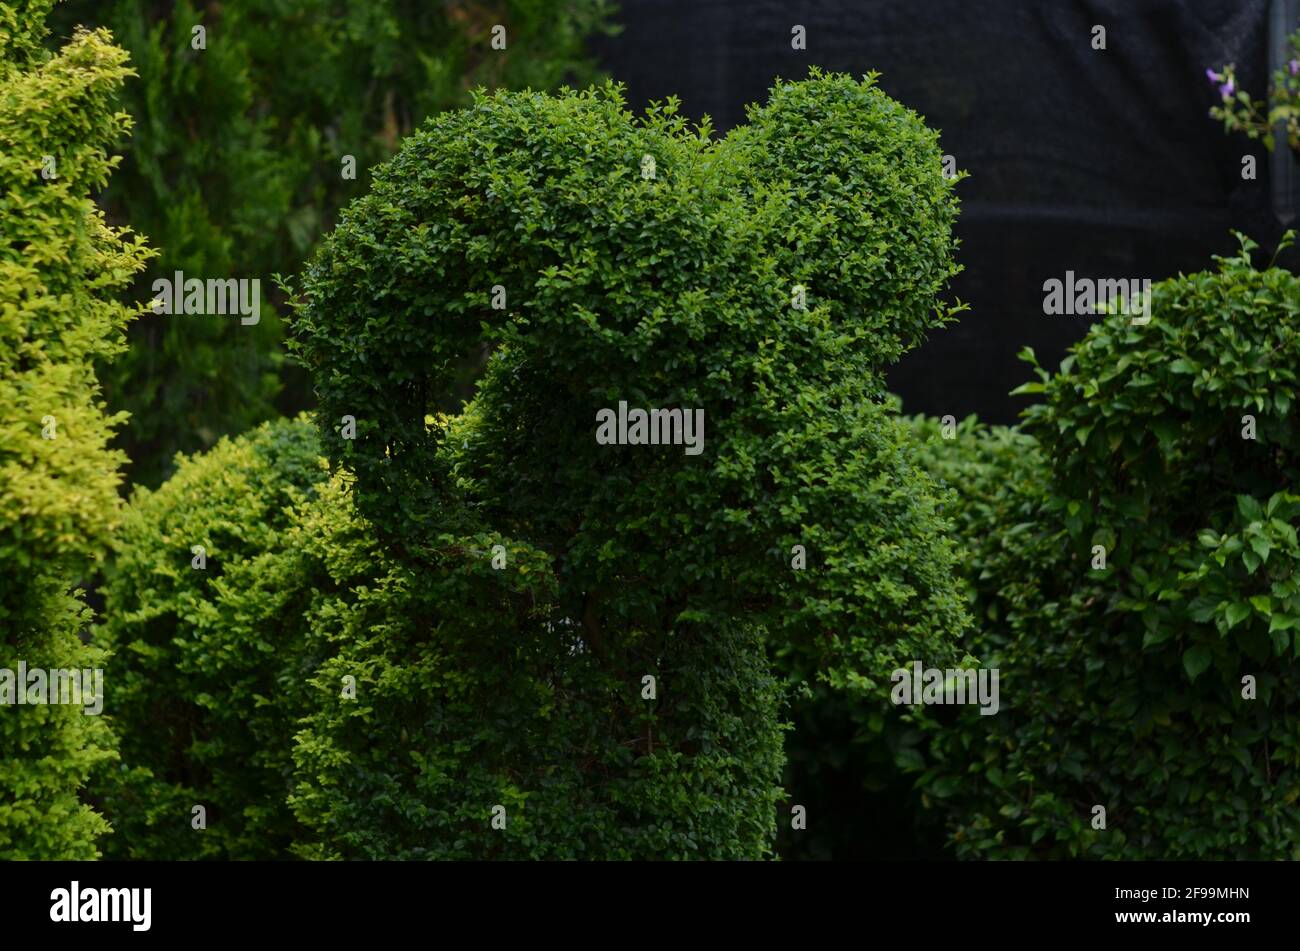 A green plant pruned to resemble a sheep. Stock Photo